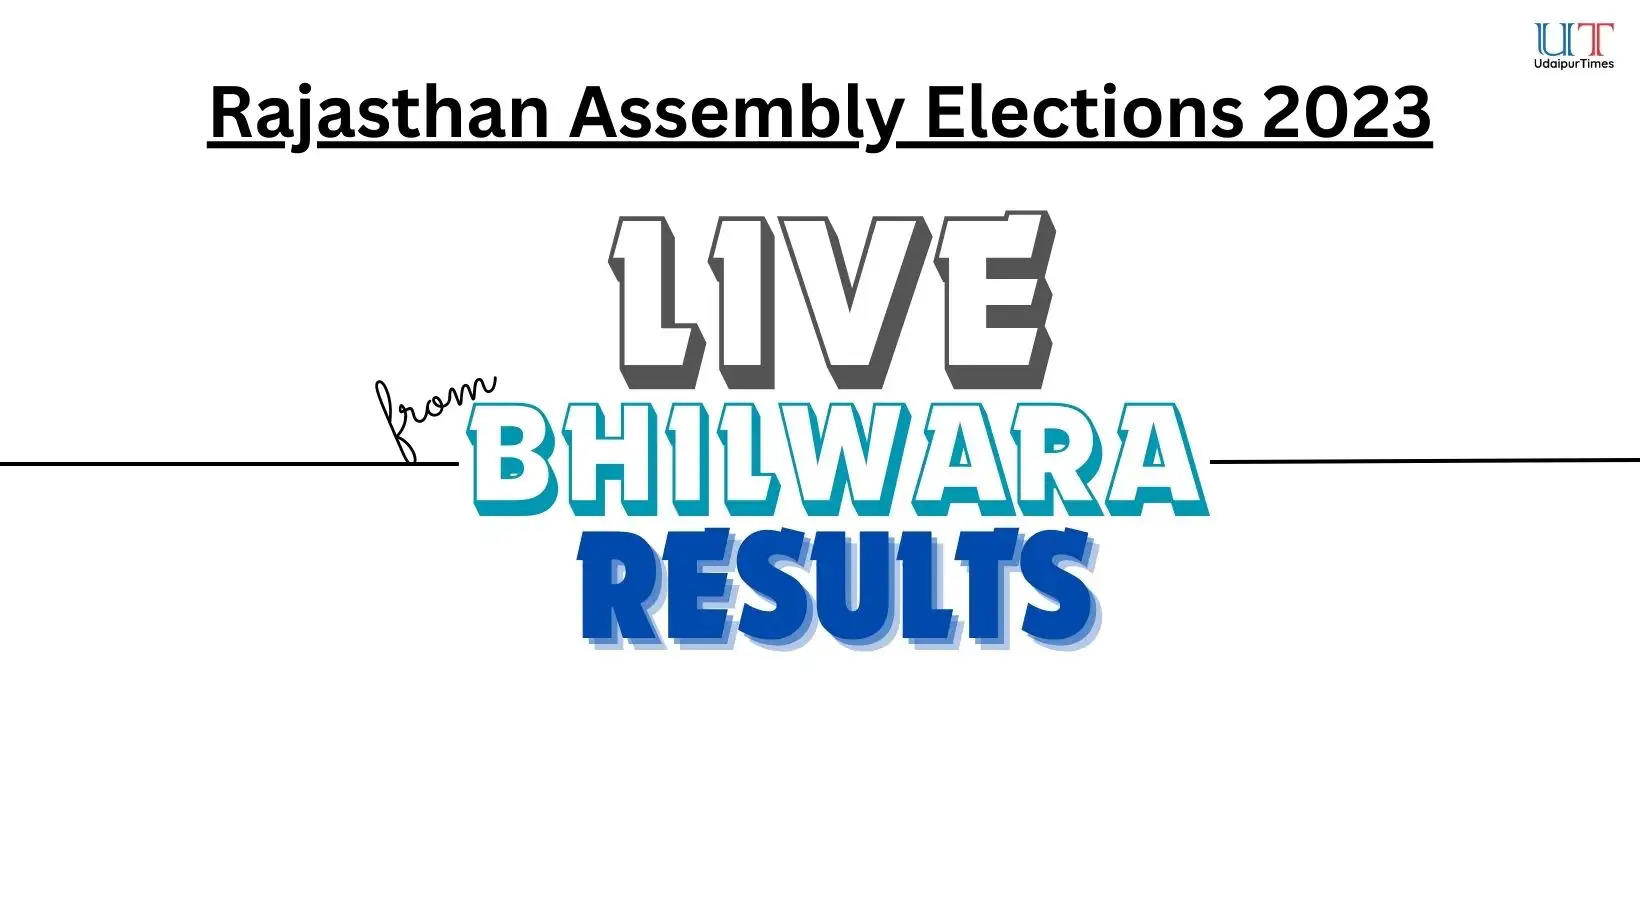 Live Results from Bhilwara Rajasthan Assembly Elections 2023